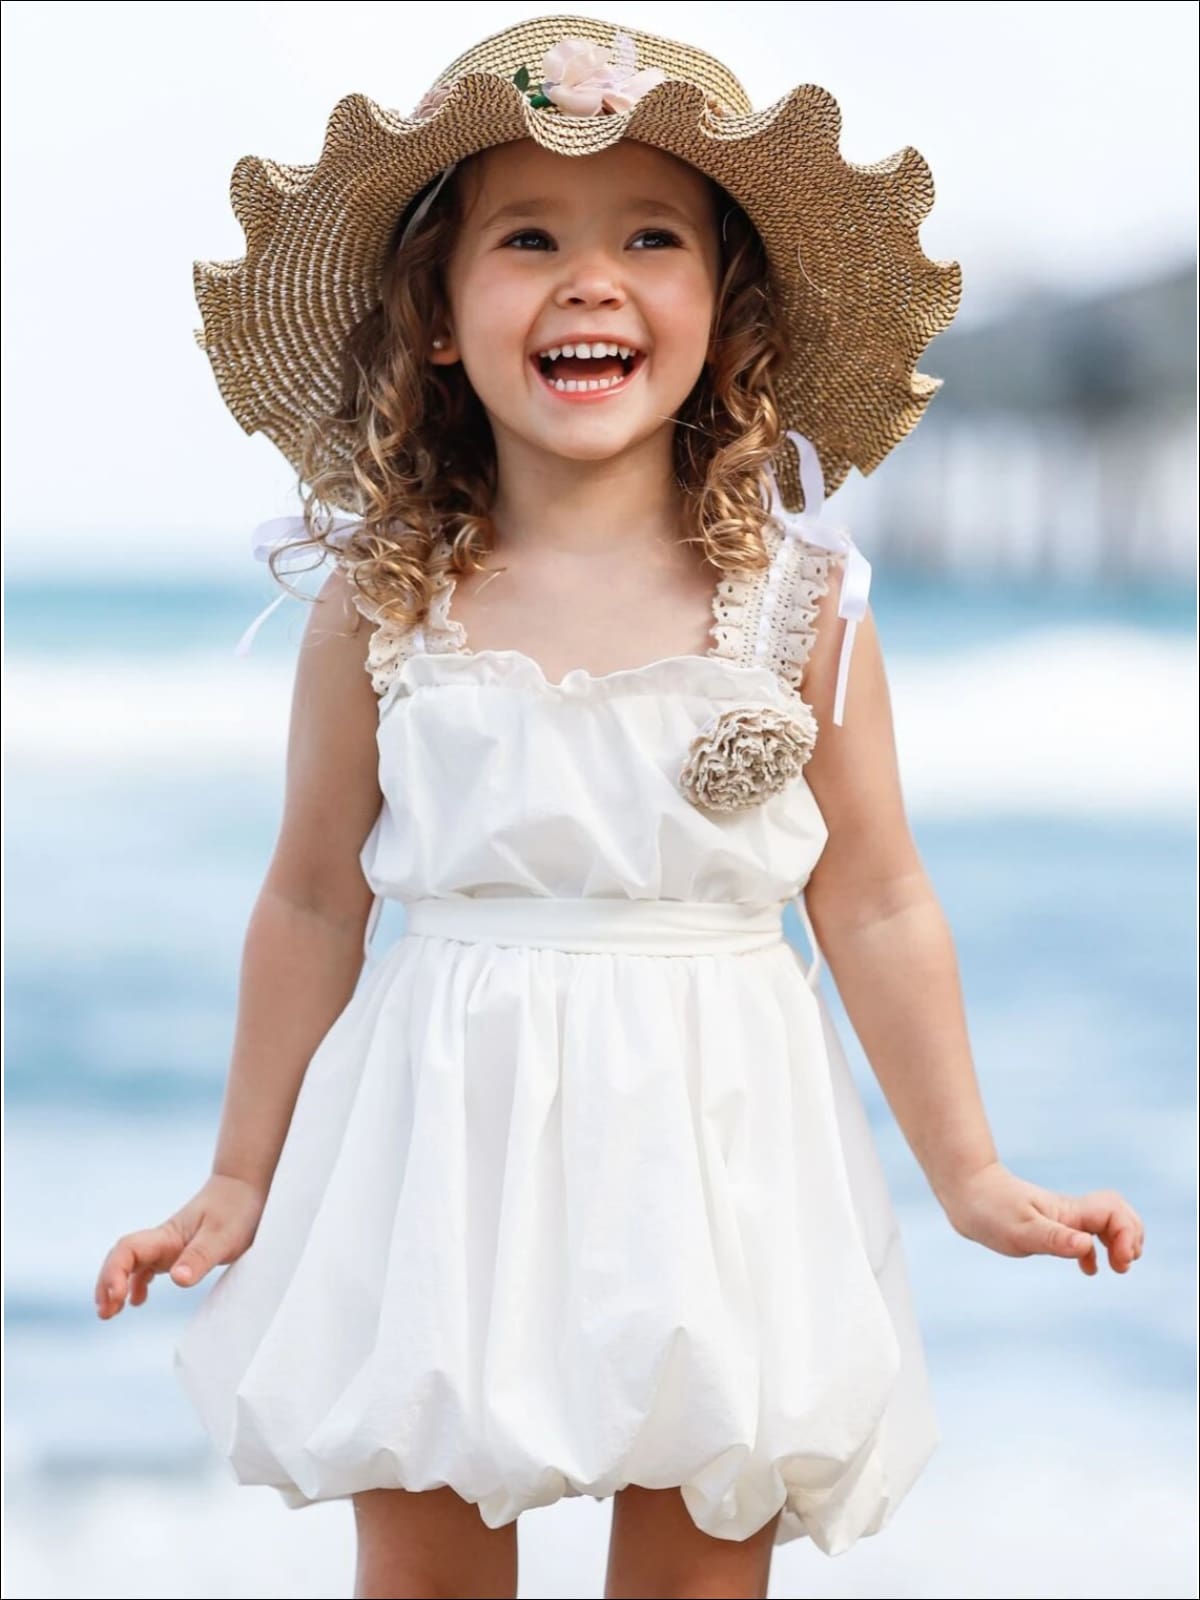 Girls Crochet Strap Bubble Dress with Sash & Flower Clip - White / 2T/3T - Girls Spring Casual Dress